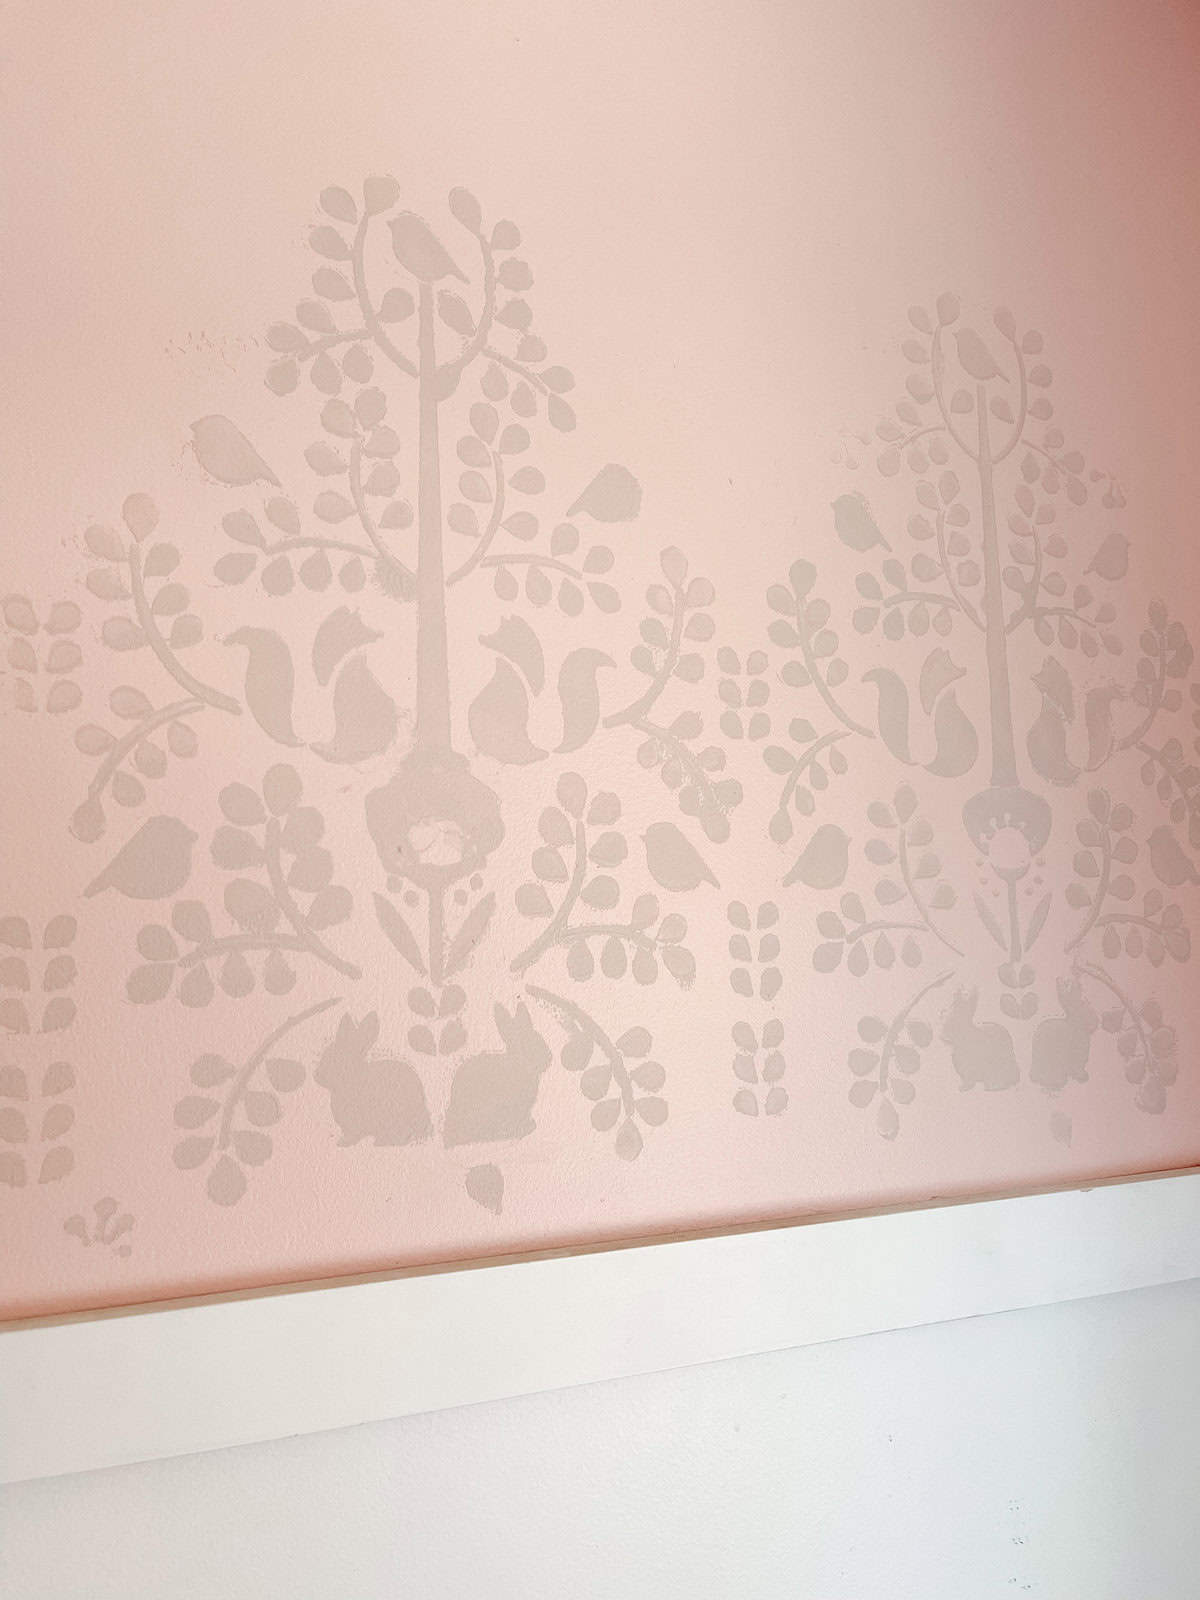 nature stencil on pink girls bedroom wall